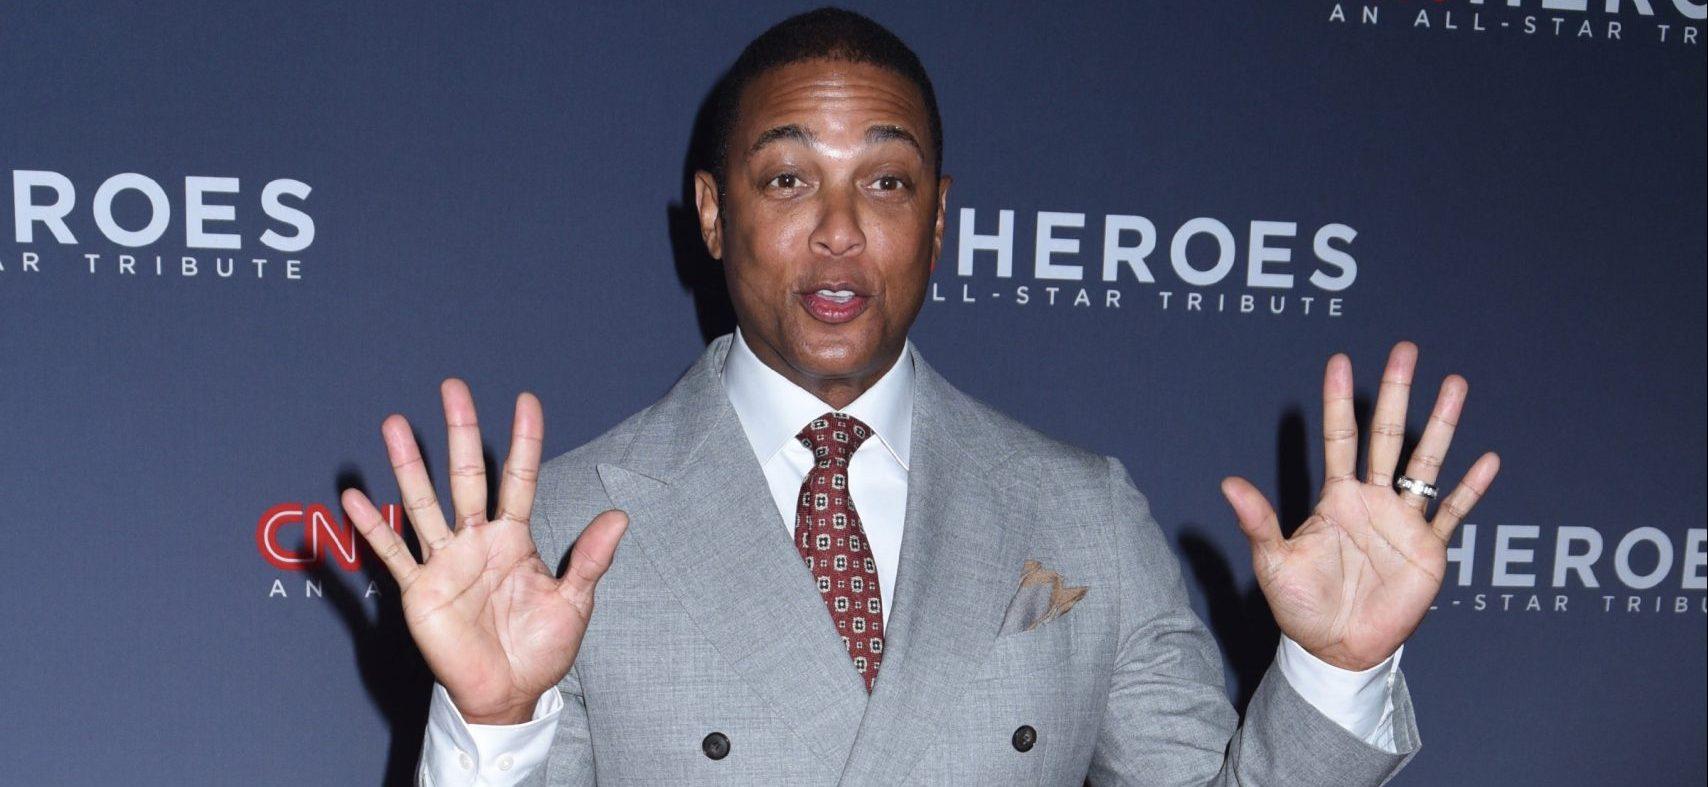 CNN's Don Lemon Slams Misogyny Accusations As 'Patently False' After Scathing Variety Exposé